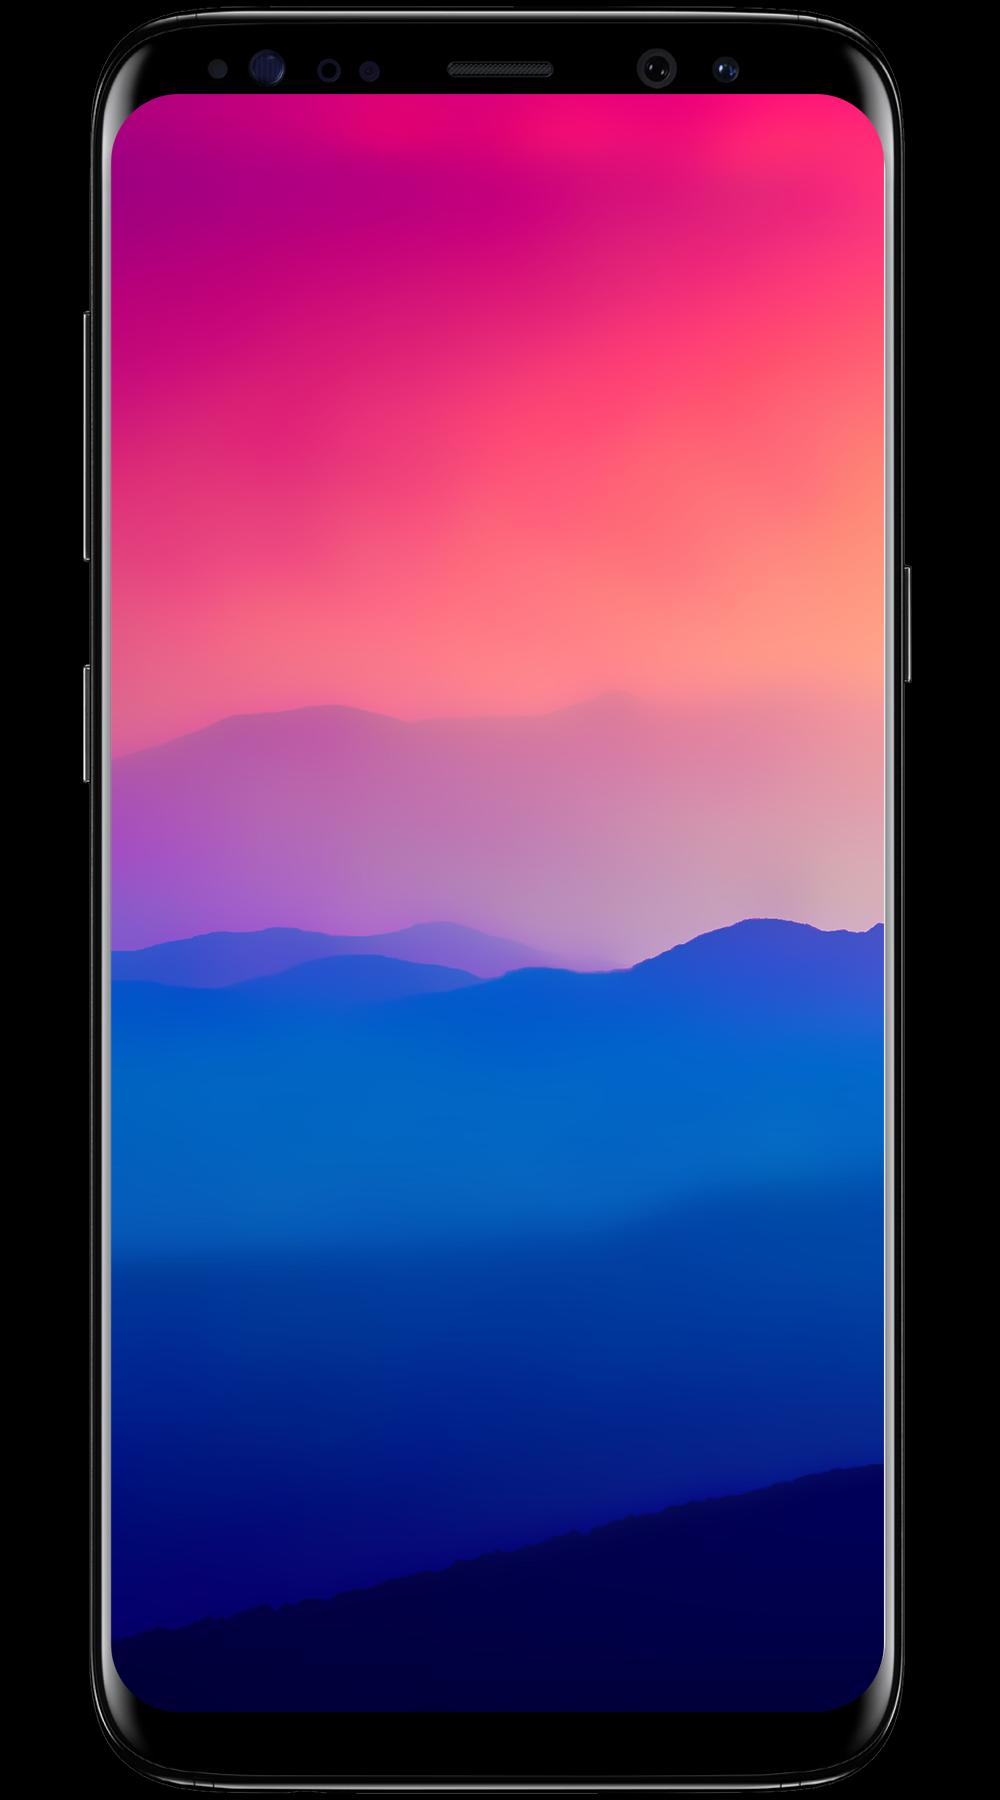 S10 Live Wallpaper HD, Amoled Background 4K Free for Android - APK Download